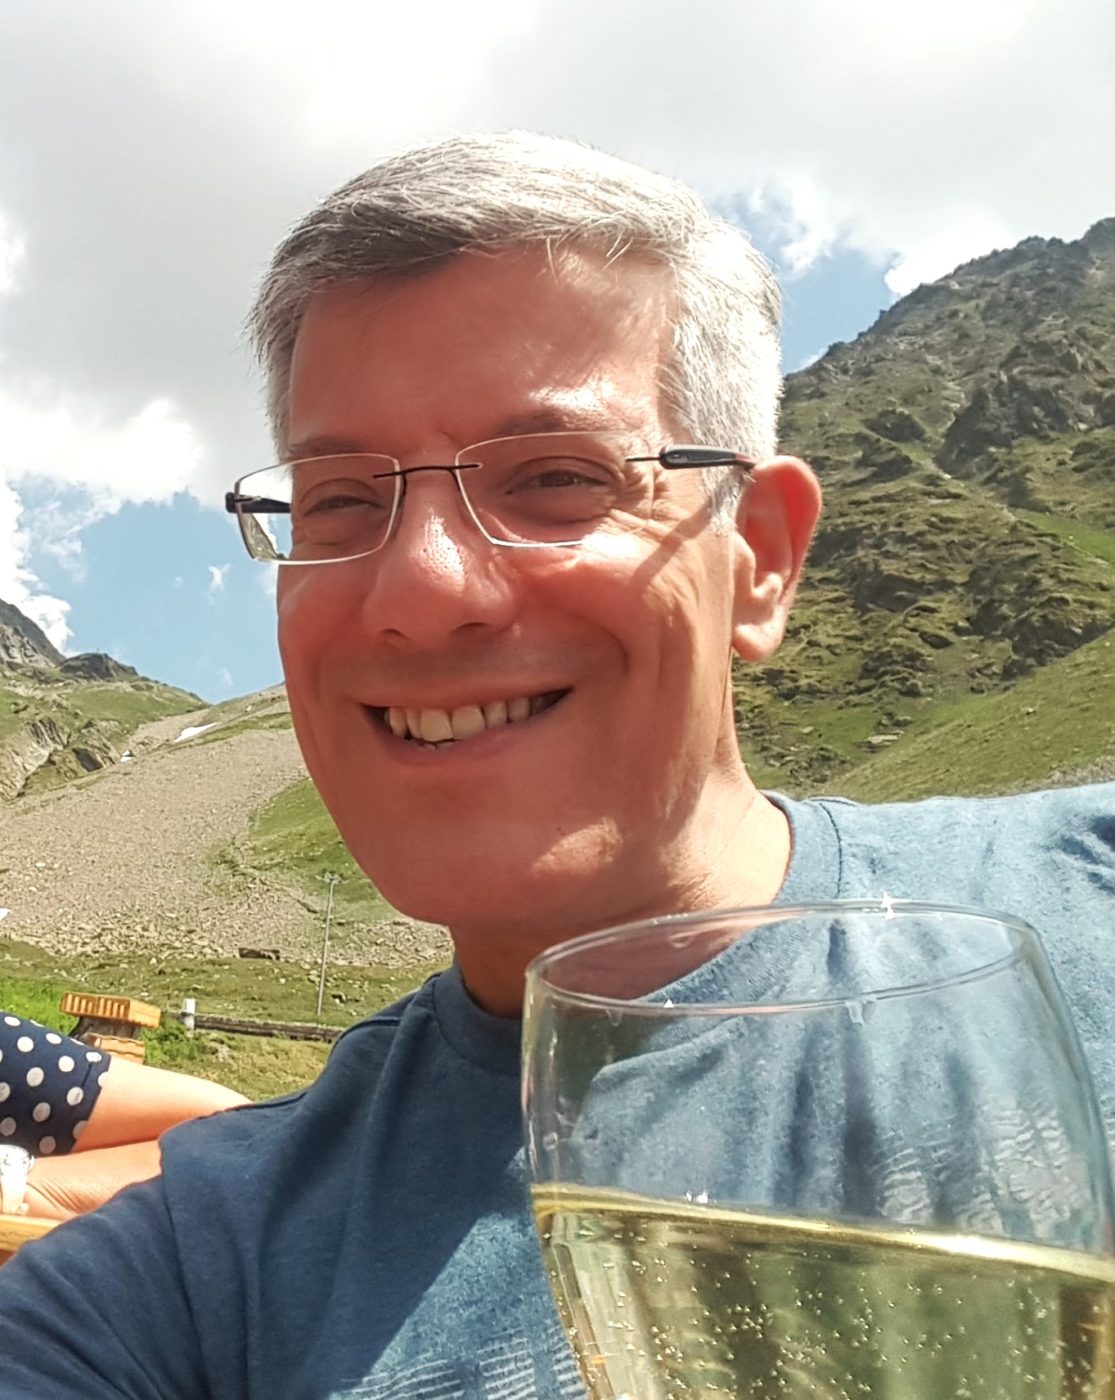 A man with white light hair wearing glasses while outside. He is smiling and holding close to the camera a glass of white wine.